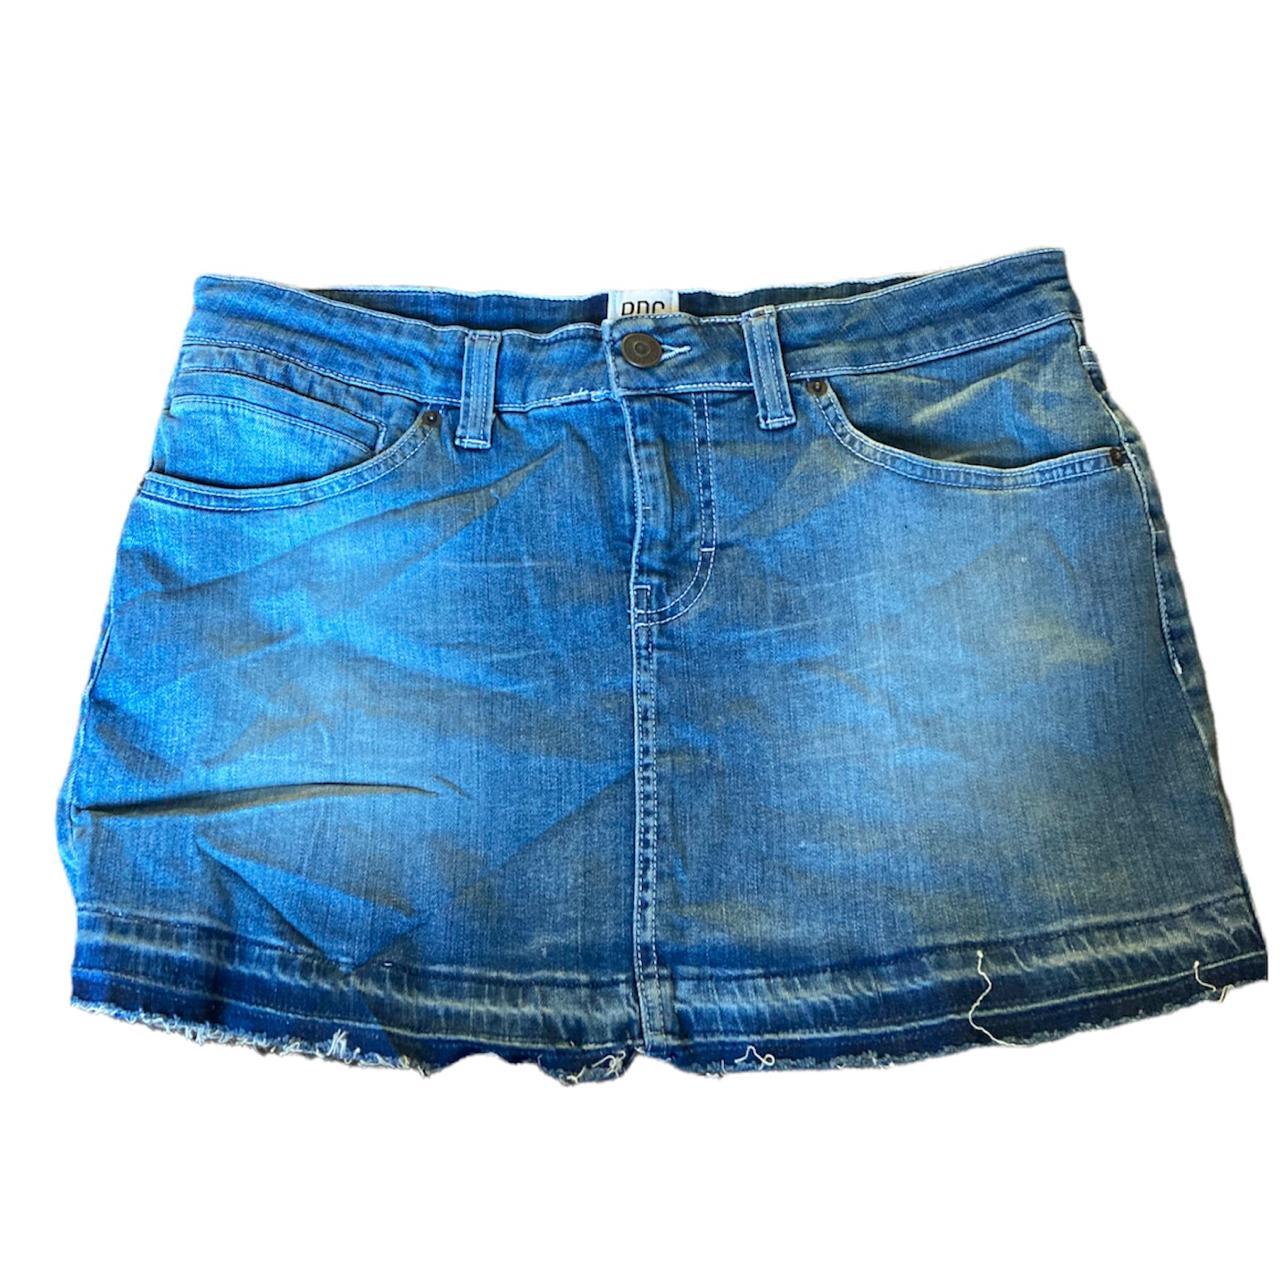 BDG mini skirt denim size m brand new without tags... - Depop